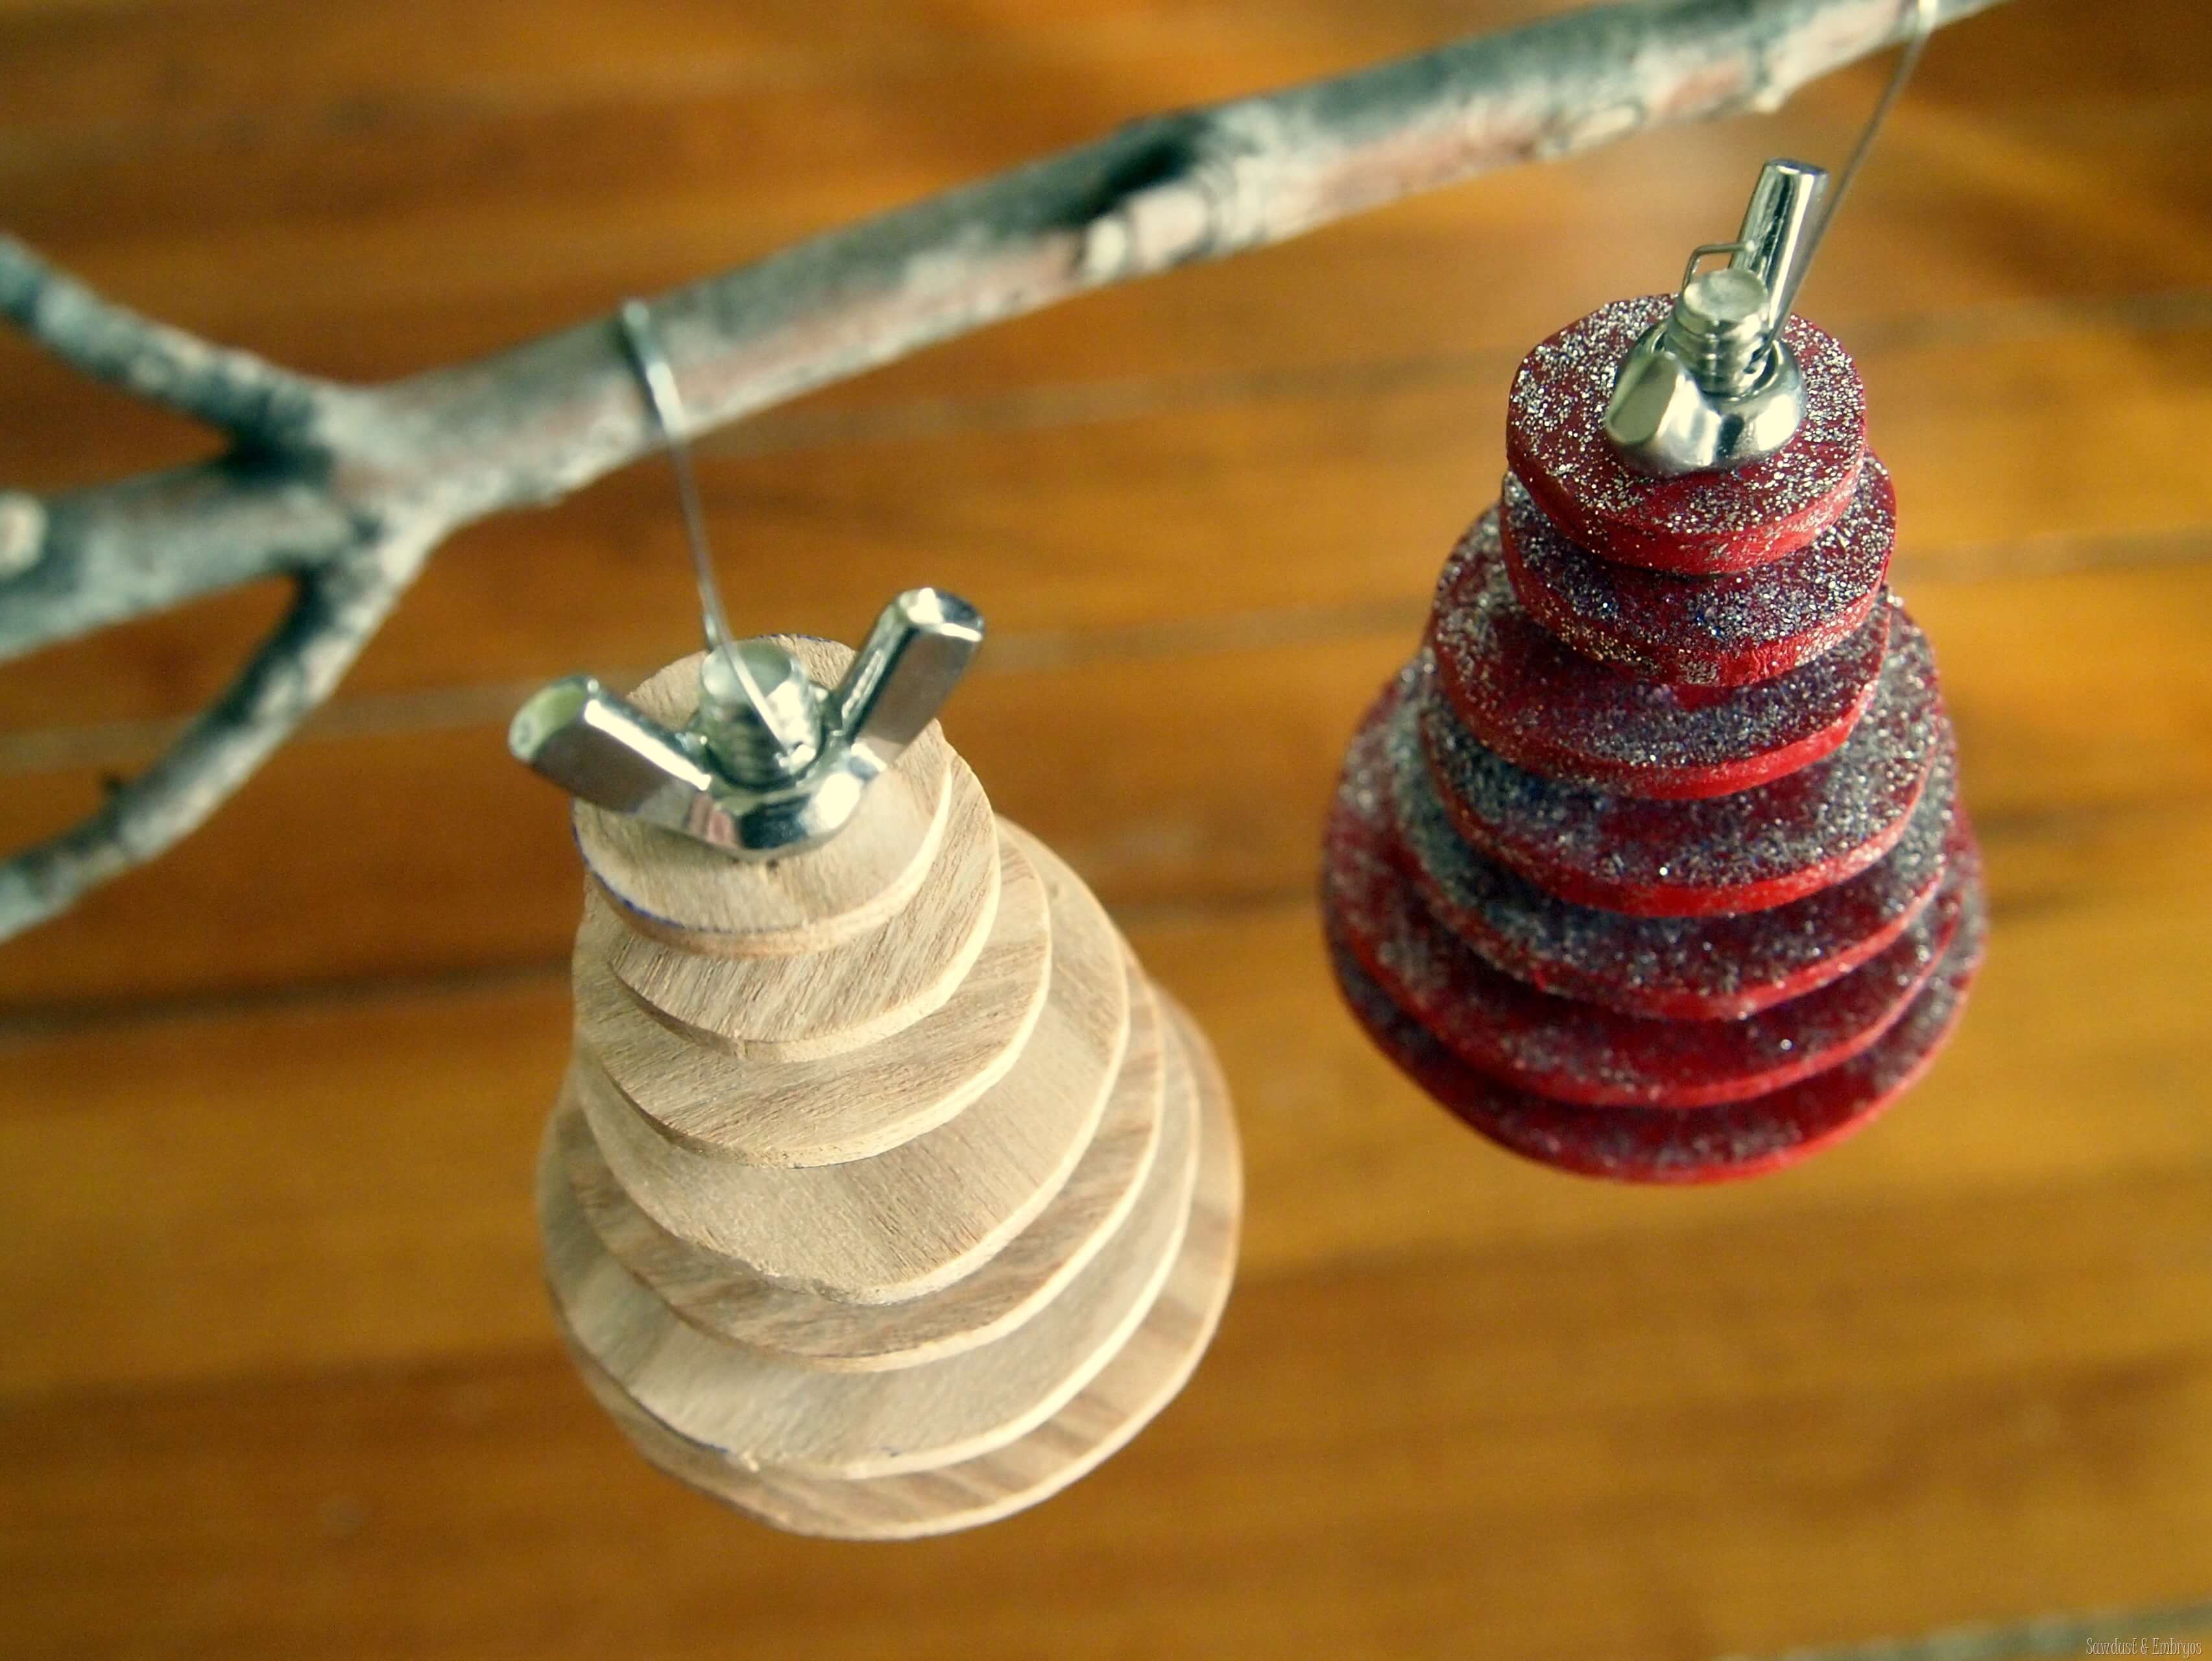 A couple of ornaments hanging from a tree branch
